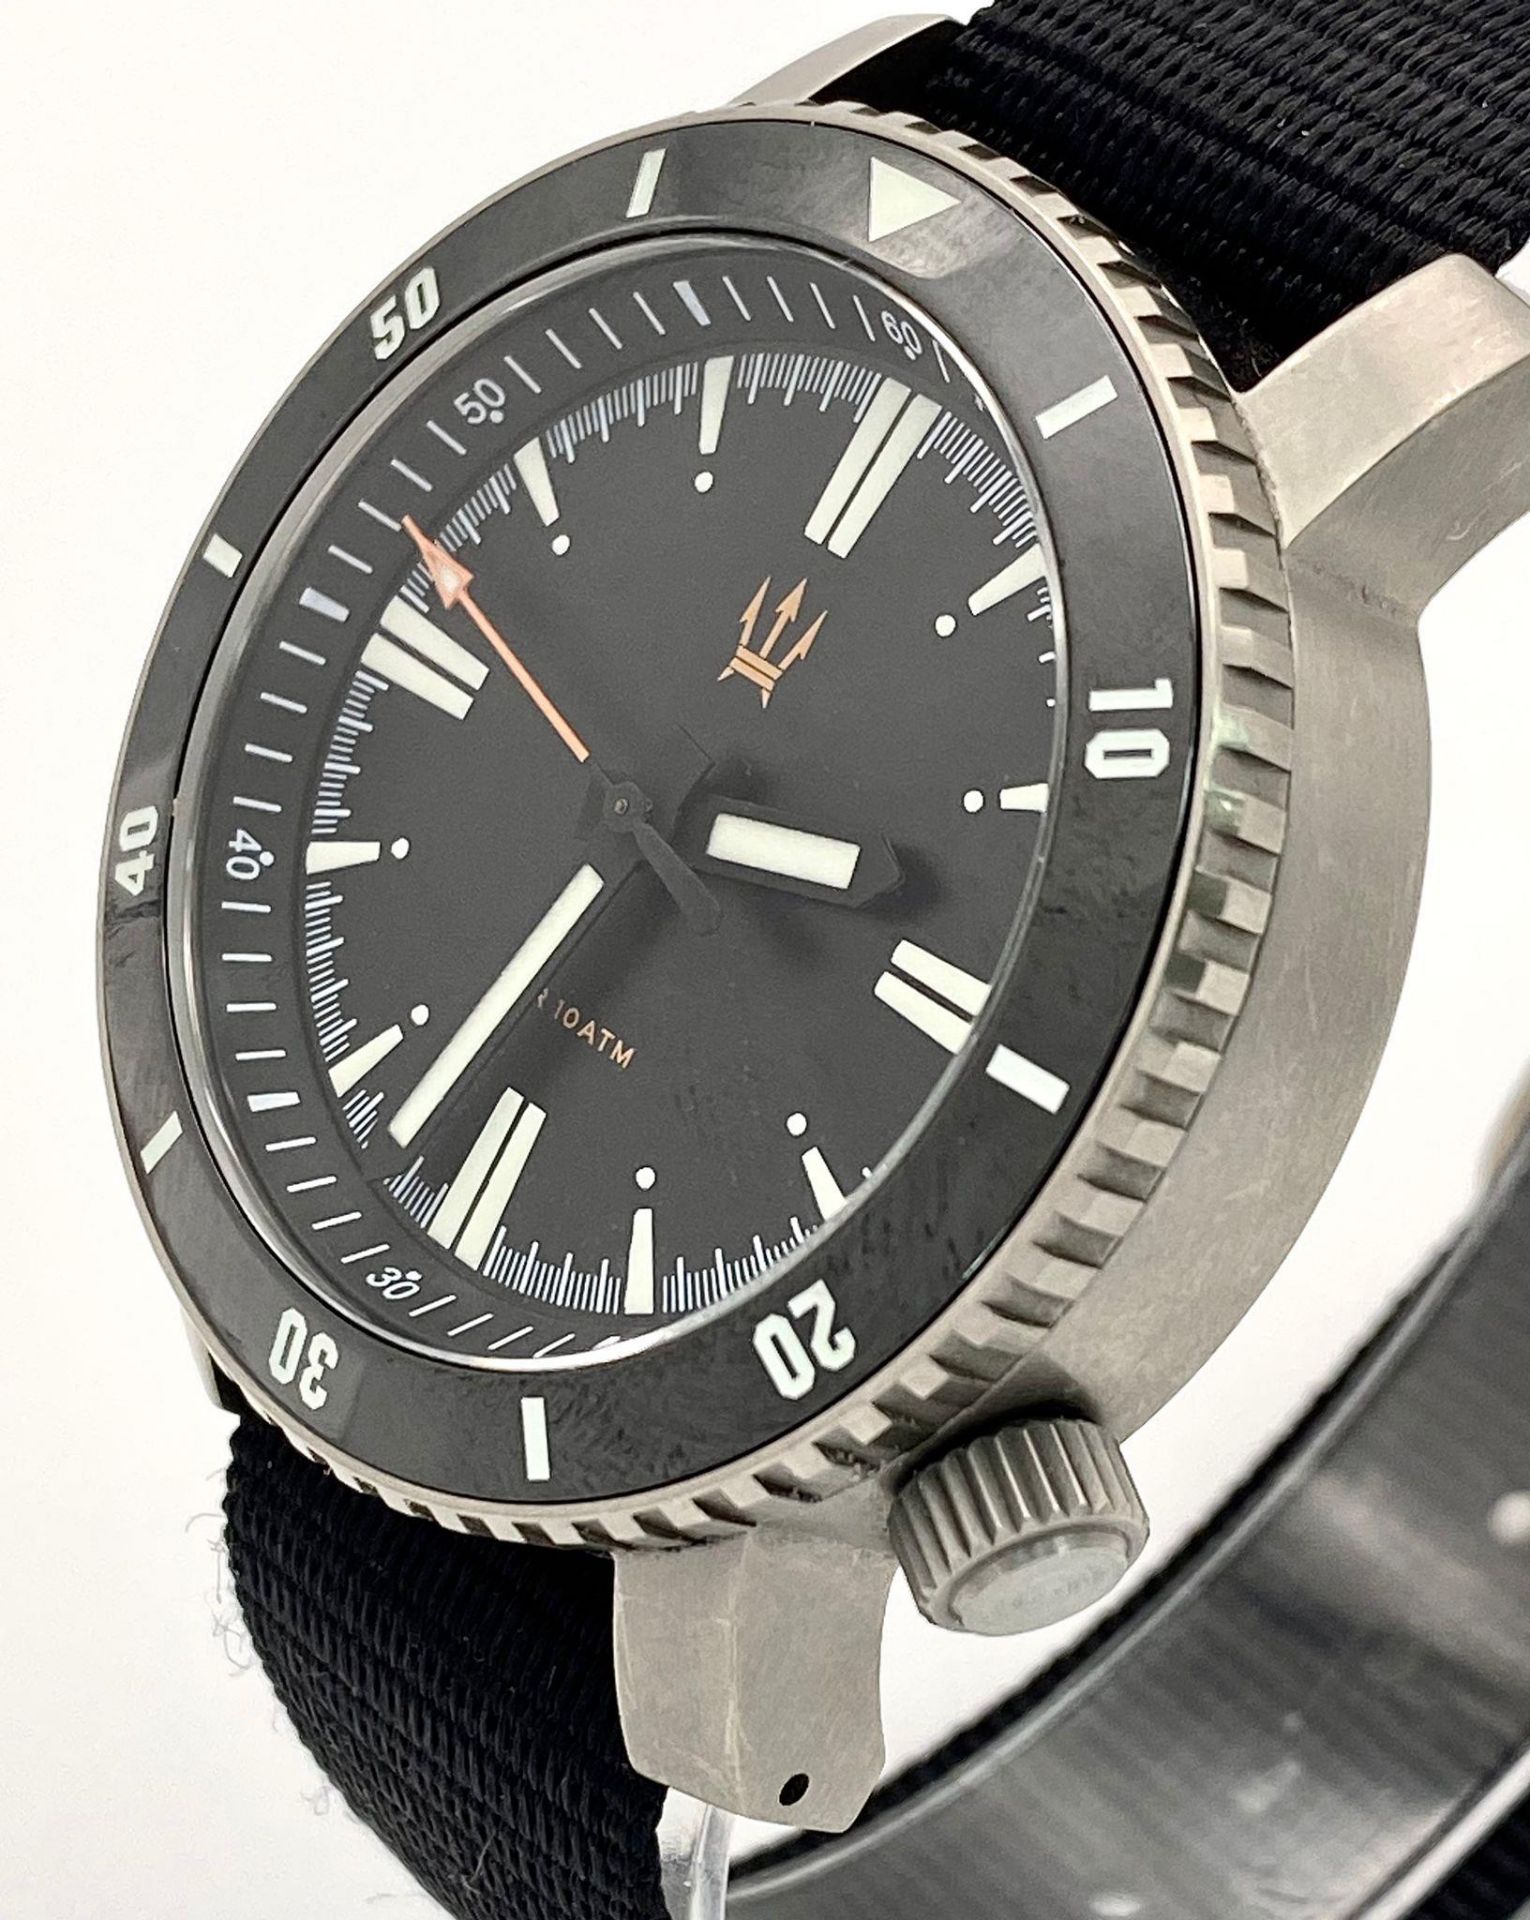 An Excellent Condition, Limited Edition, Military Specification, Automatic Divers Watch by - Image 4 of 7